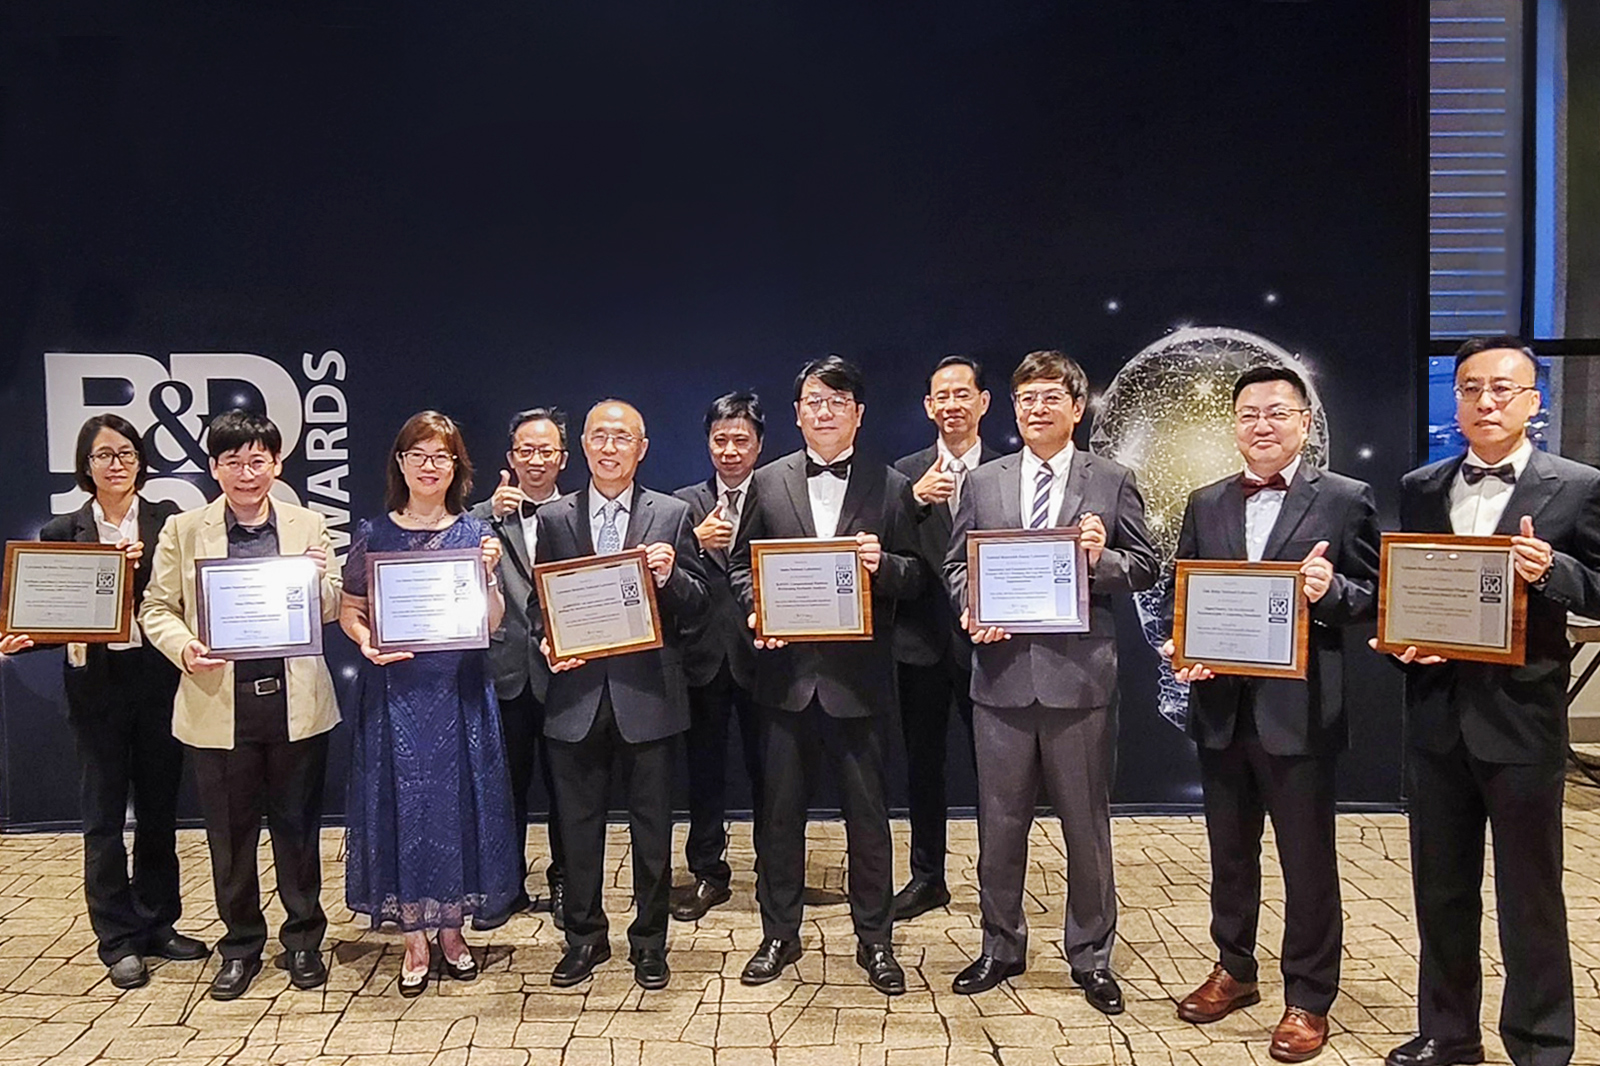 Representatives of ITRI’s research teams, Pegatron, and Asahi-Utou Technology are honored with the 2023 R&D 100 Awards at the gala in San Diego on November 16.